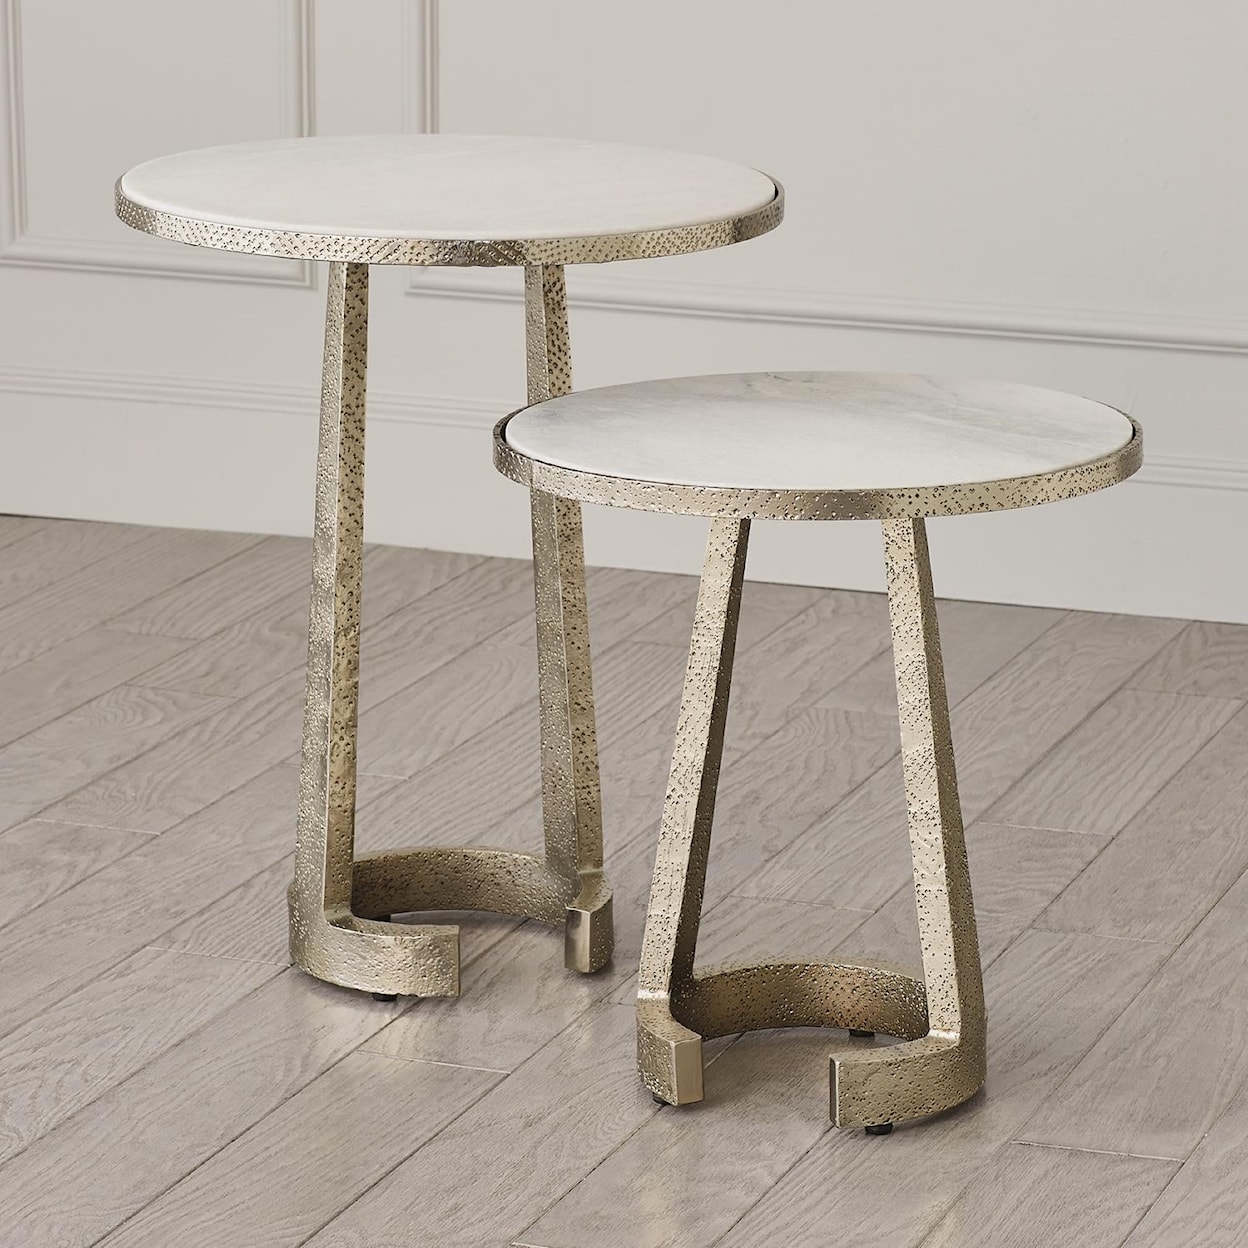 Global Views Accents C Table-Nickel-Lg